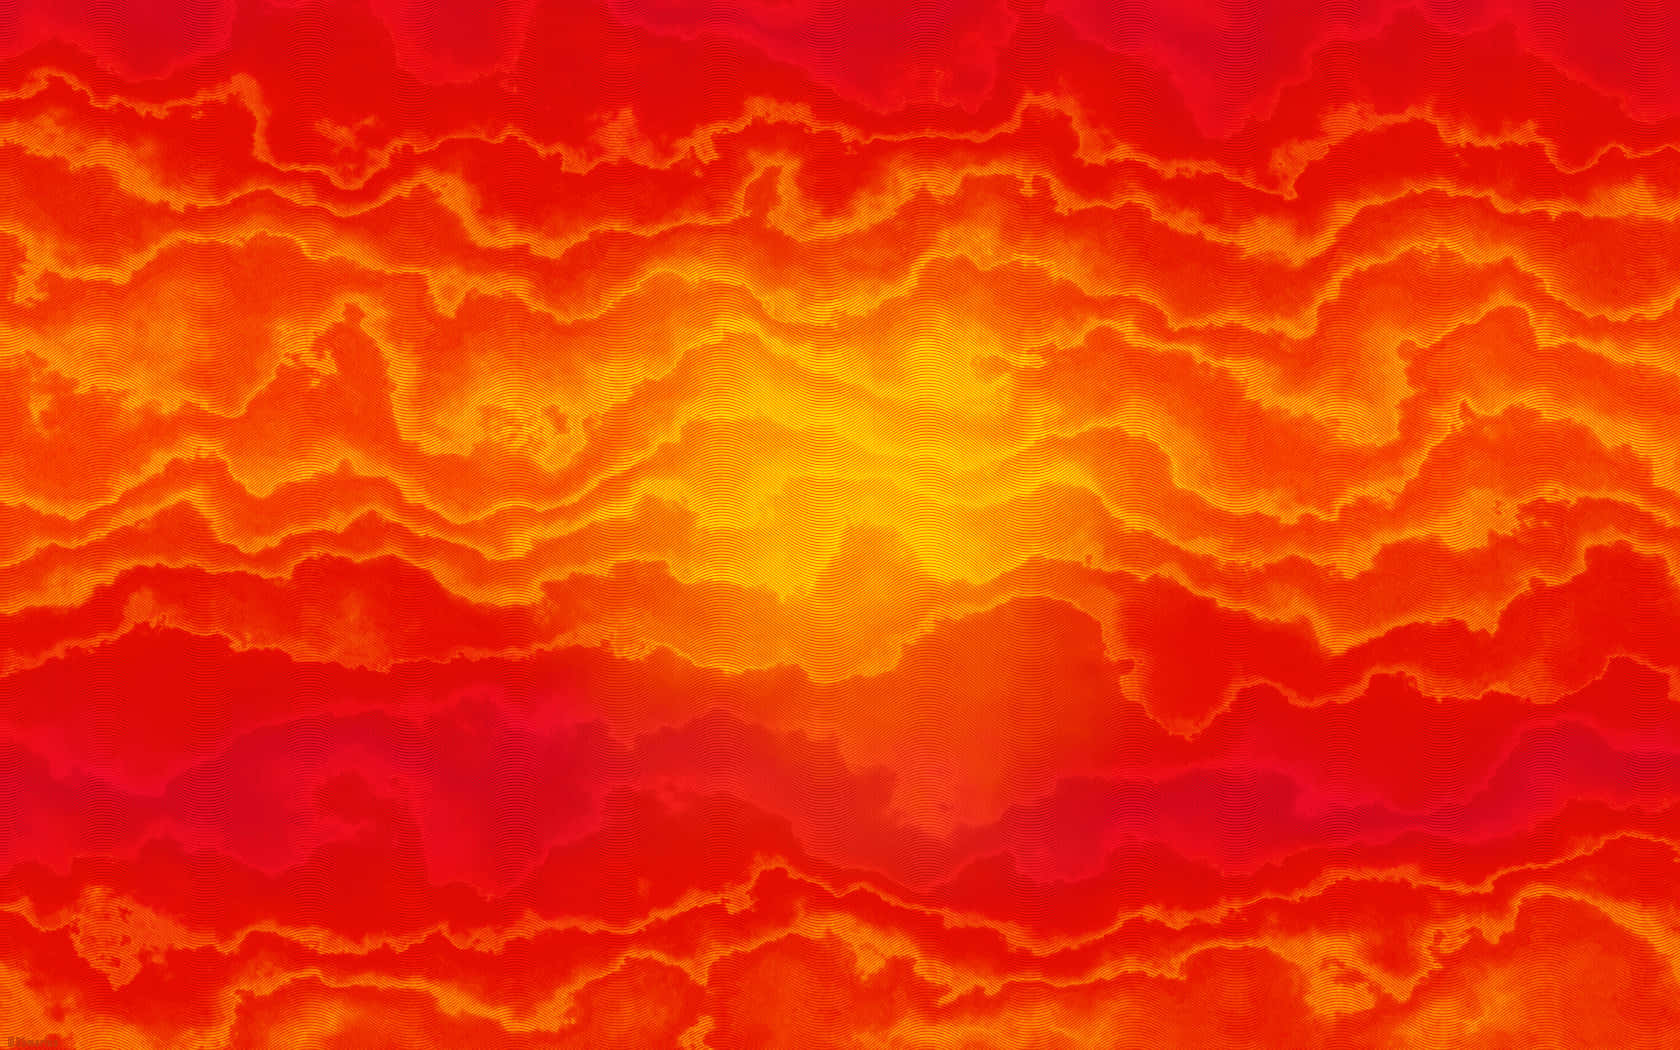 A Red And Orange Background With A Sun